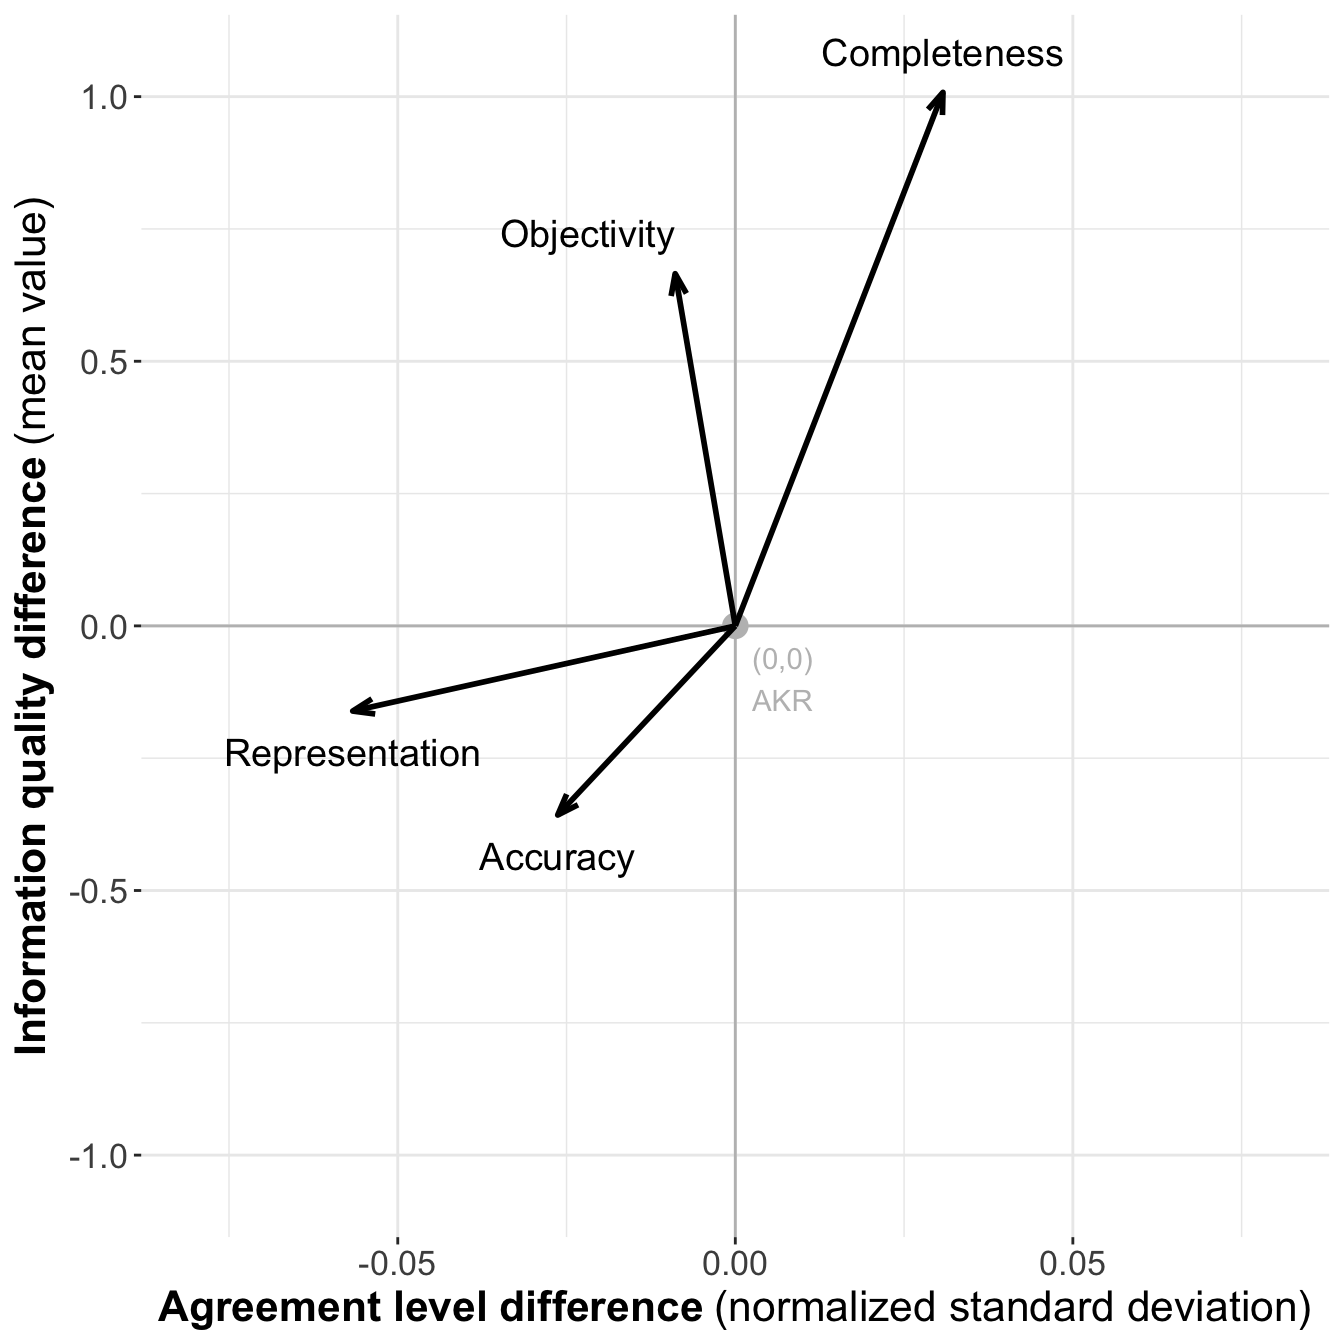 Difference of agreement level and IQ for individual dimensions as vectors compared to AKR $(0,0)$